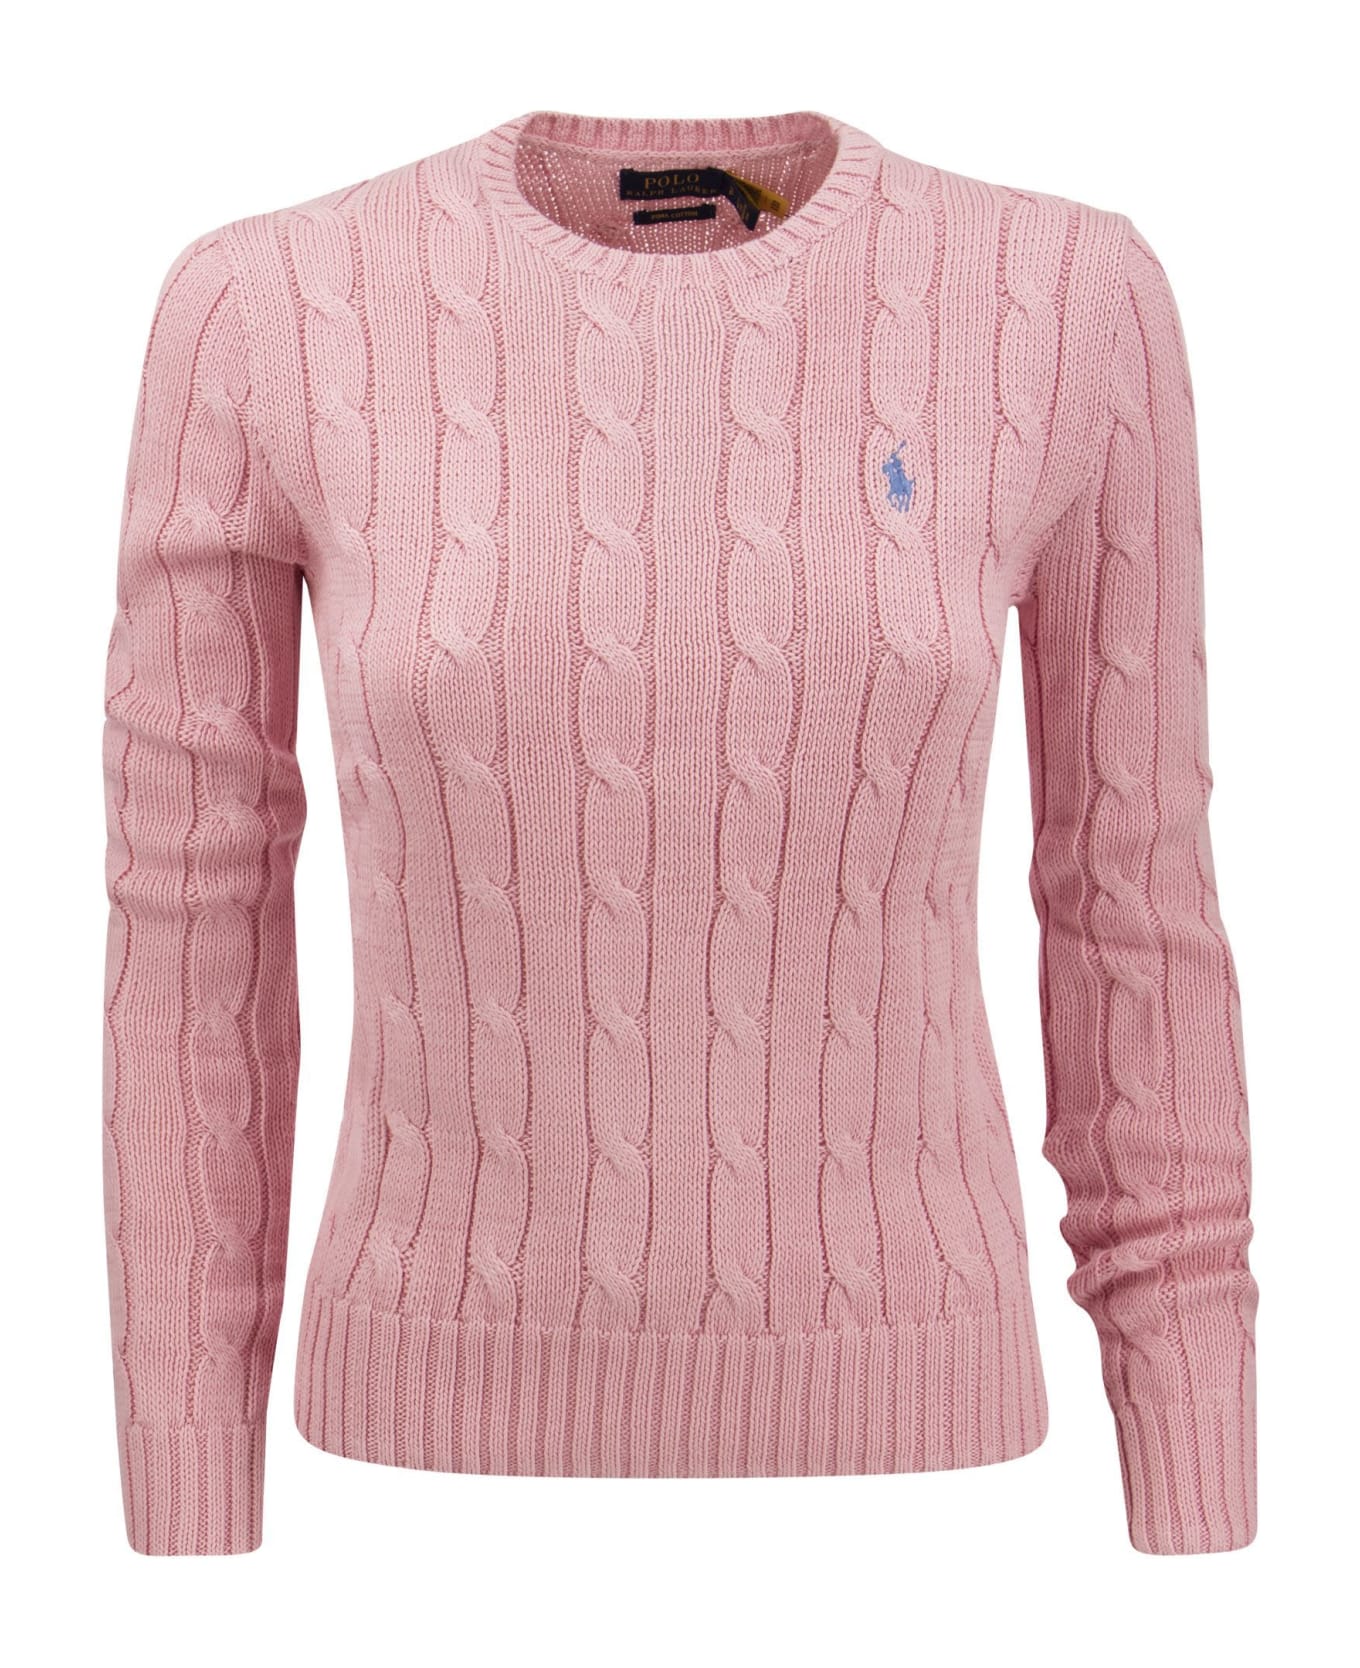 Polo Ralph Lauren Crew Neck Sweater In Pink Braided Knit - Pink ニットウェア